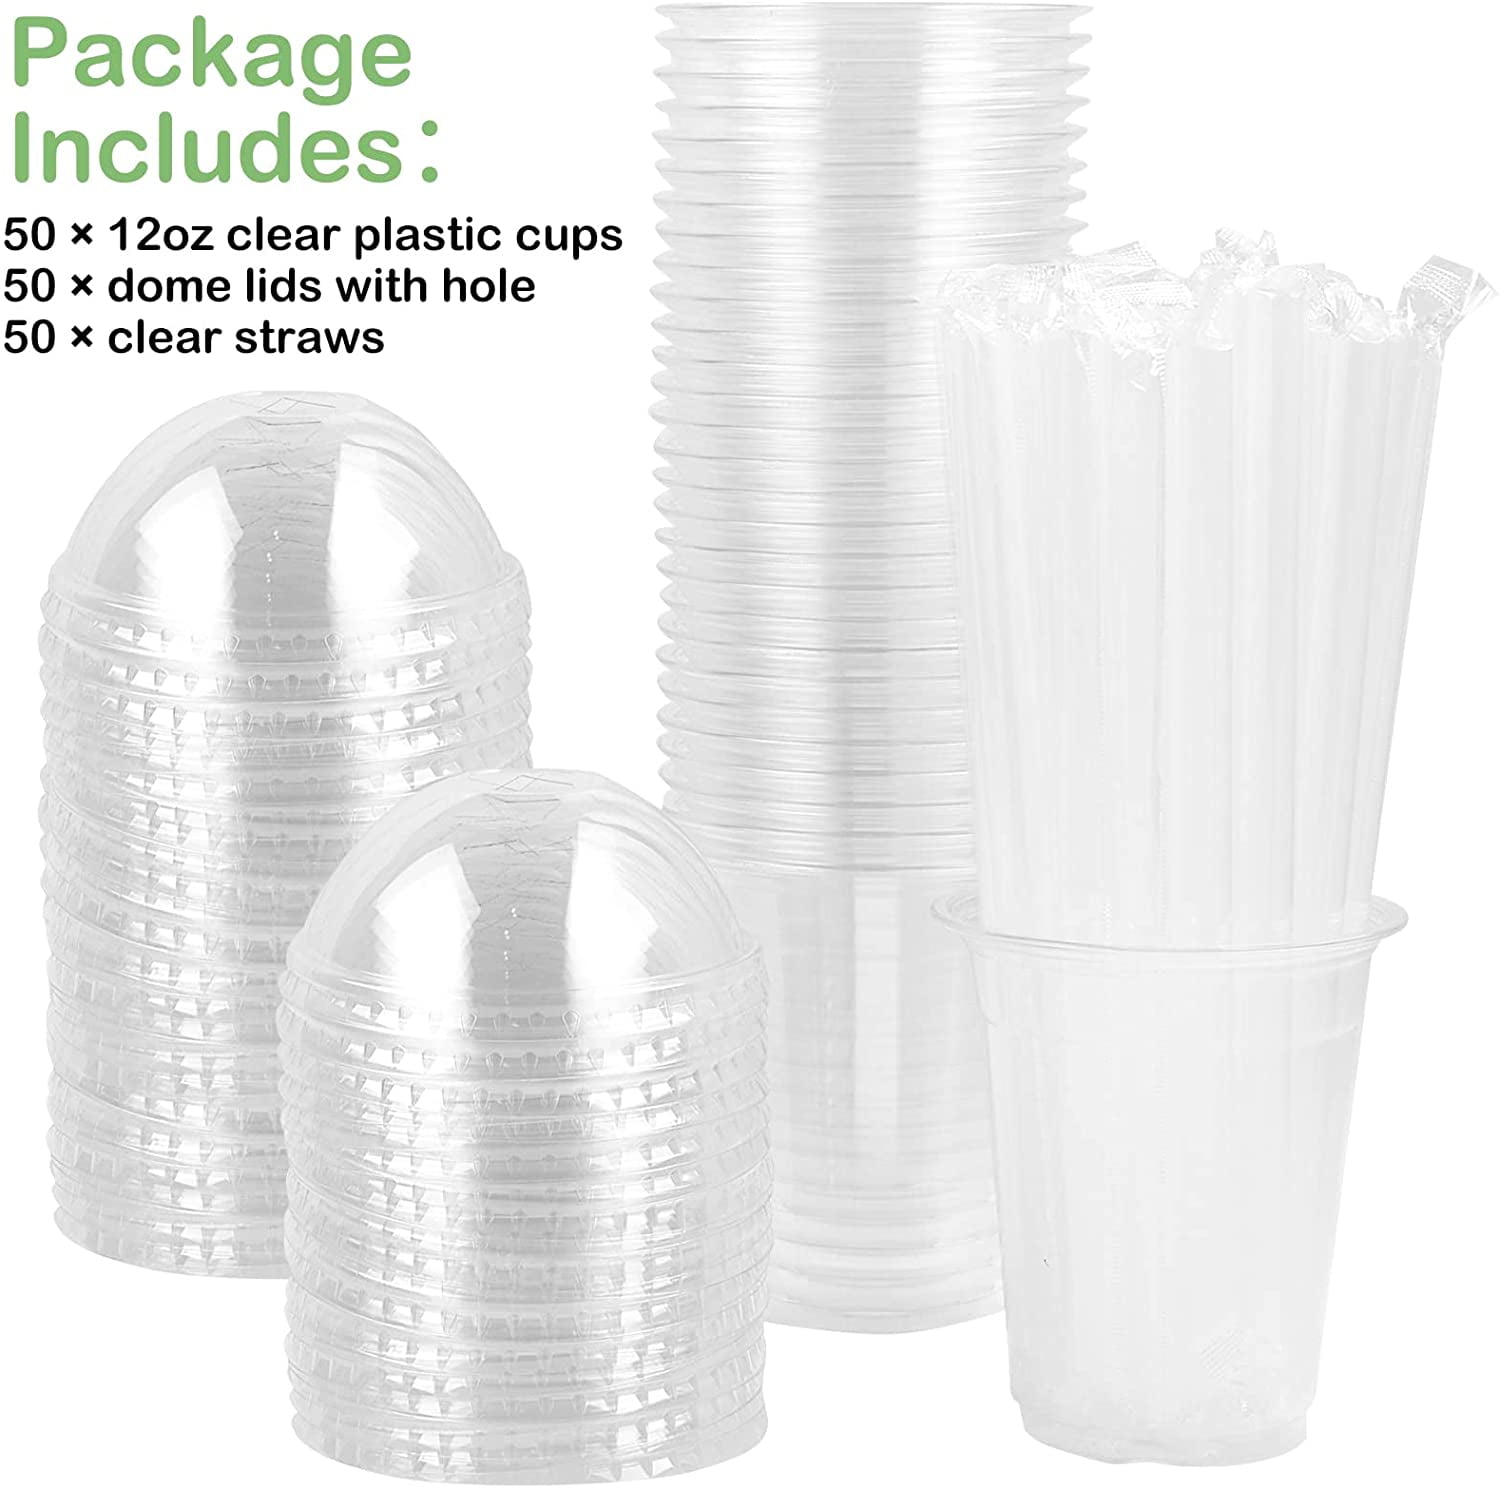 12oz / 340ml x 50 per Pack Majestic Clear Plastic Smoothie Cups 